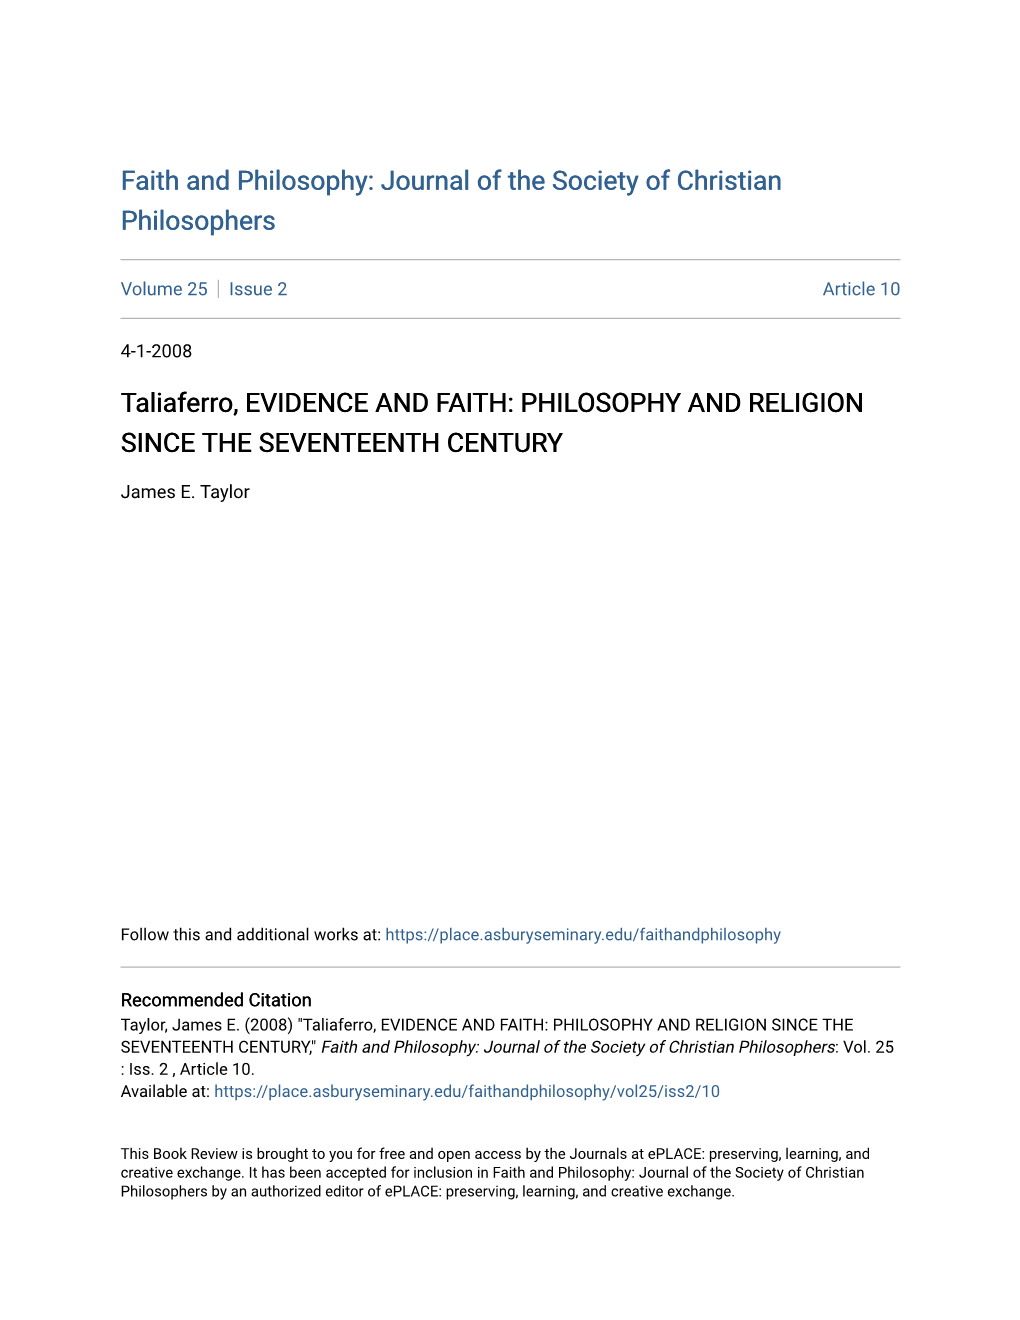 Taliaferro, EVIDENCE and FAITH: PHILOSOPHY and RELIGION SINCE the SEVENTEENTH CENTURY